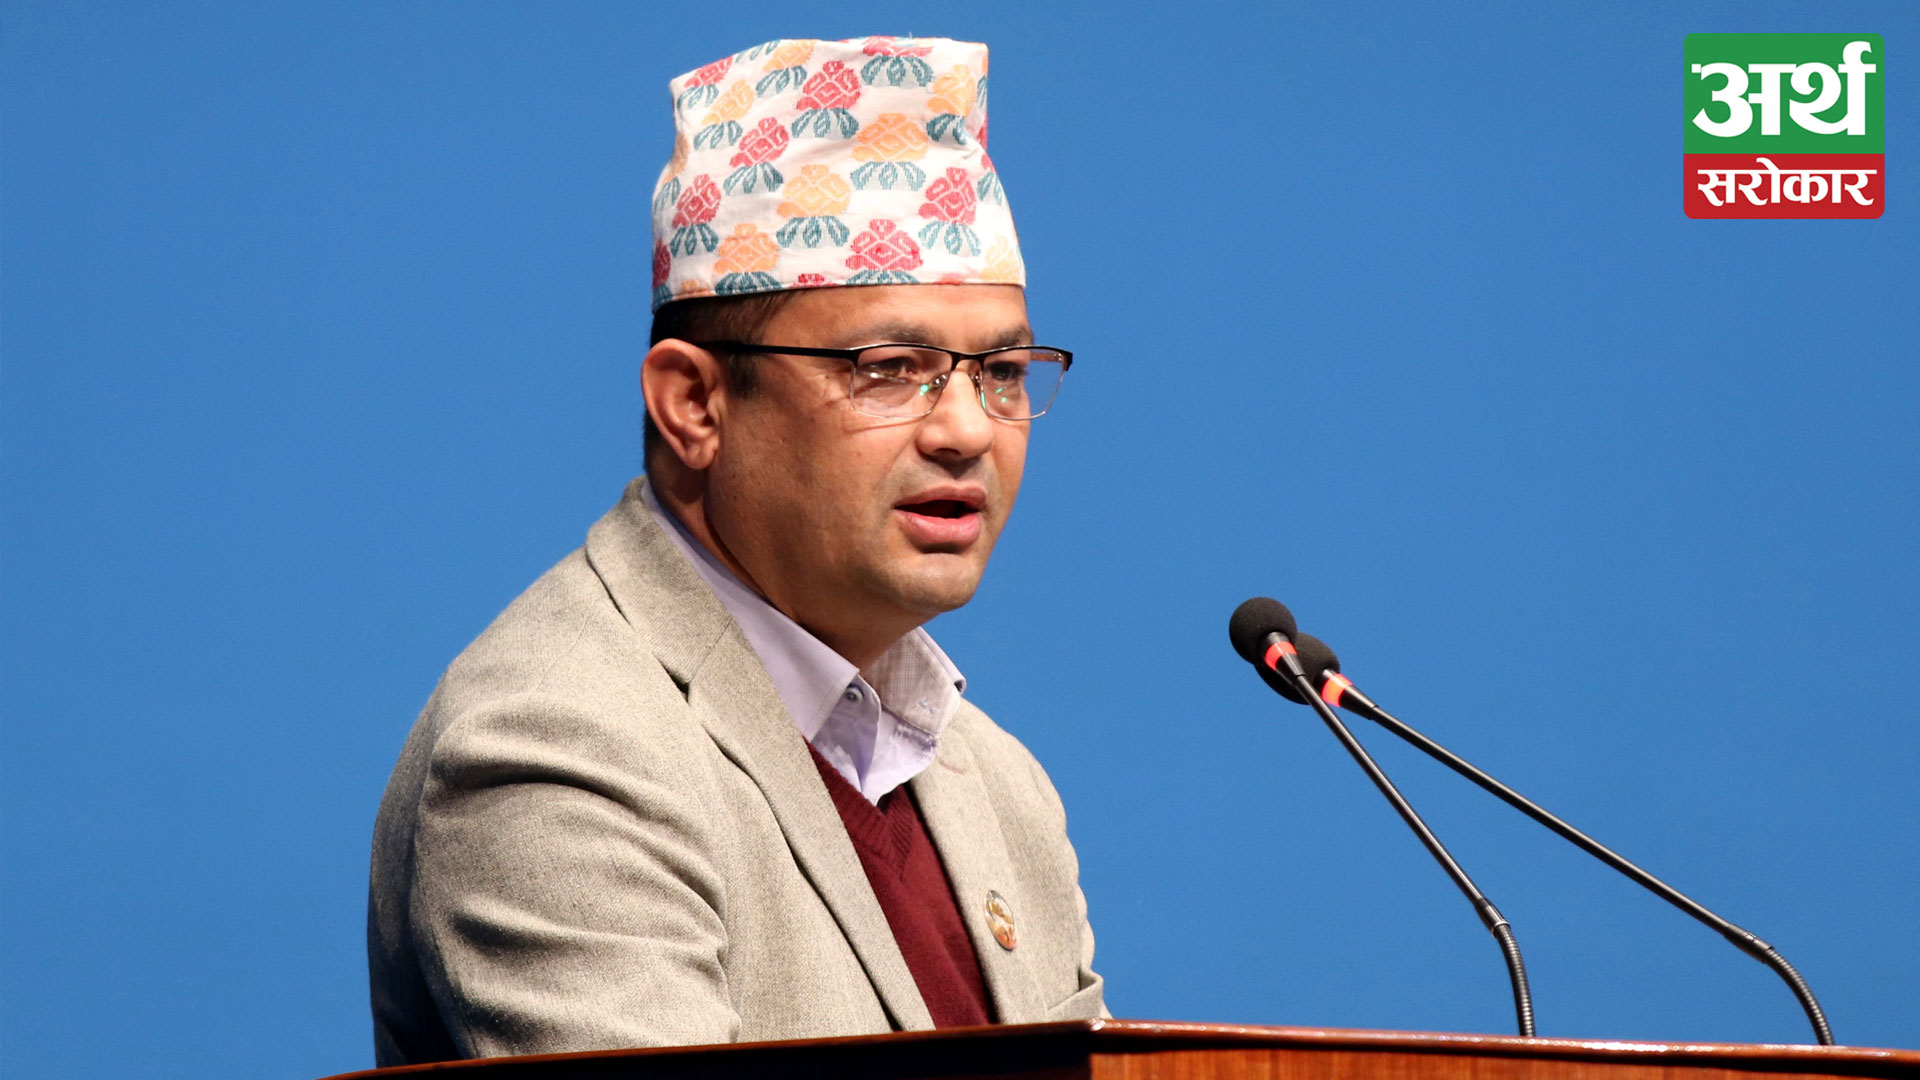 UML Chief Whip urges the government to increase accountability